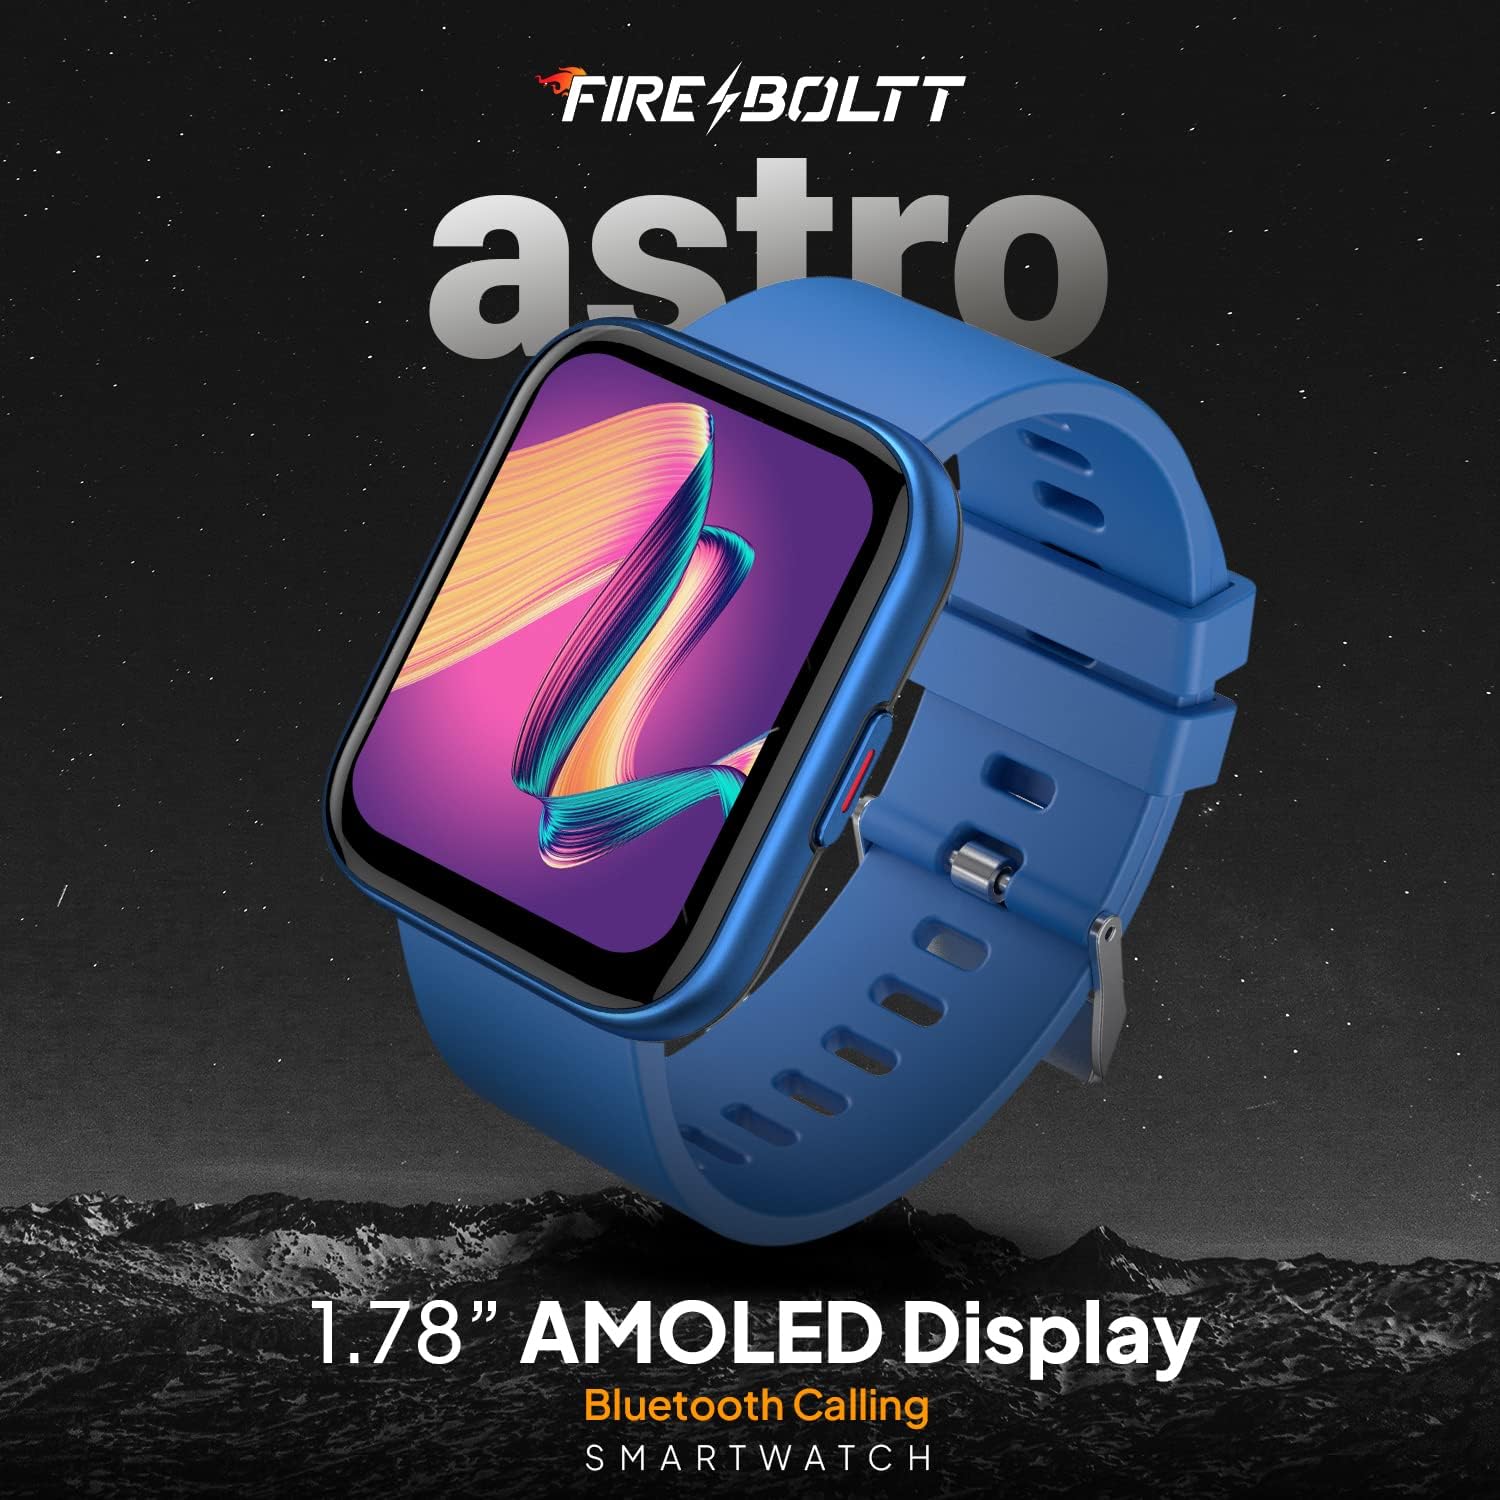 Fire-Boltt Astro 1.78" AMOLED Display Smartwatch, Always On Display, Bluetooth Calling with AI Voice, 110+ Sports Modes, Rotating Button Technology, High Resolution of 368*448 Pixels, Silver